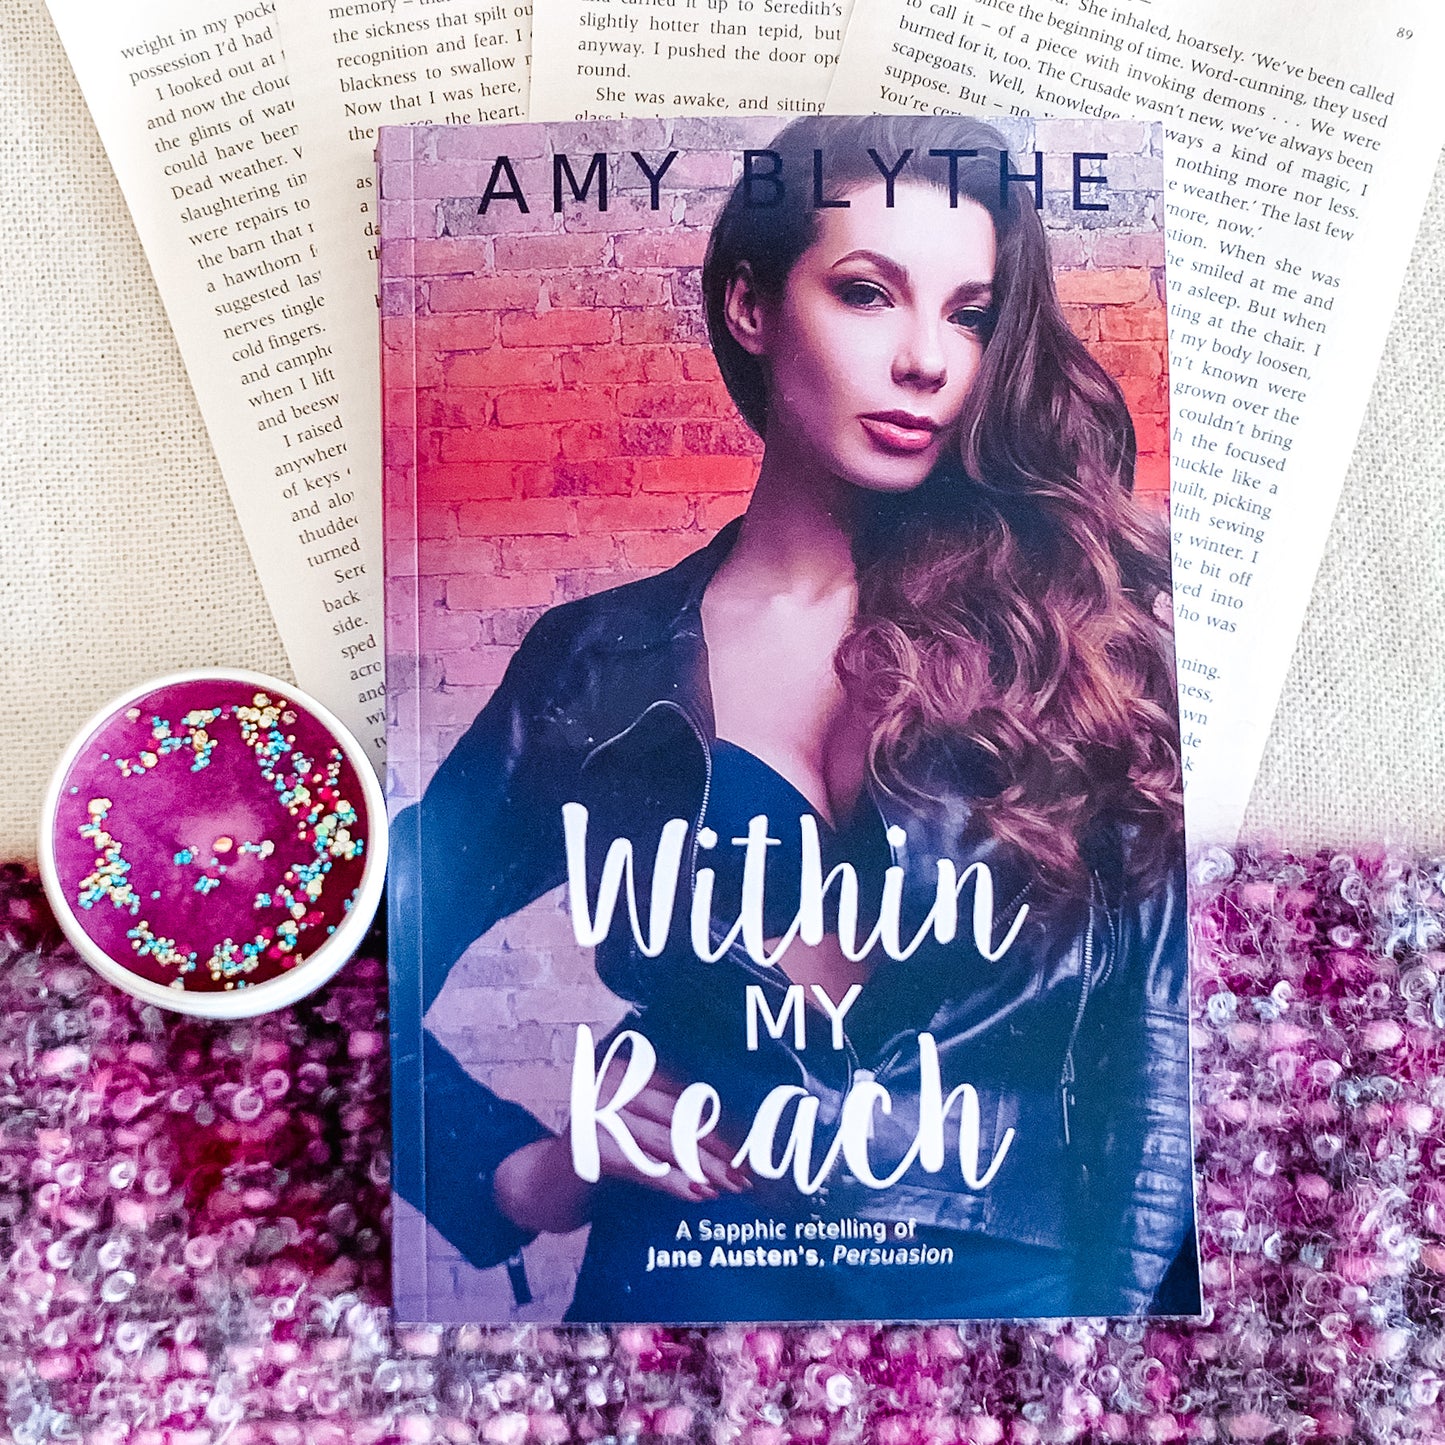 Within My Reach by Amy Blythe